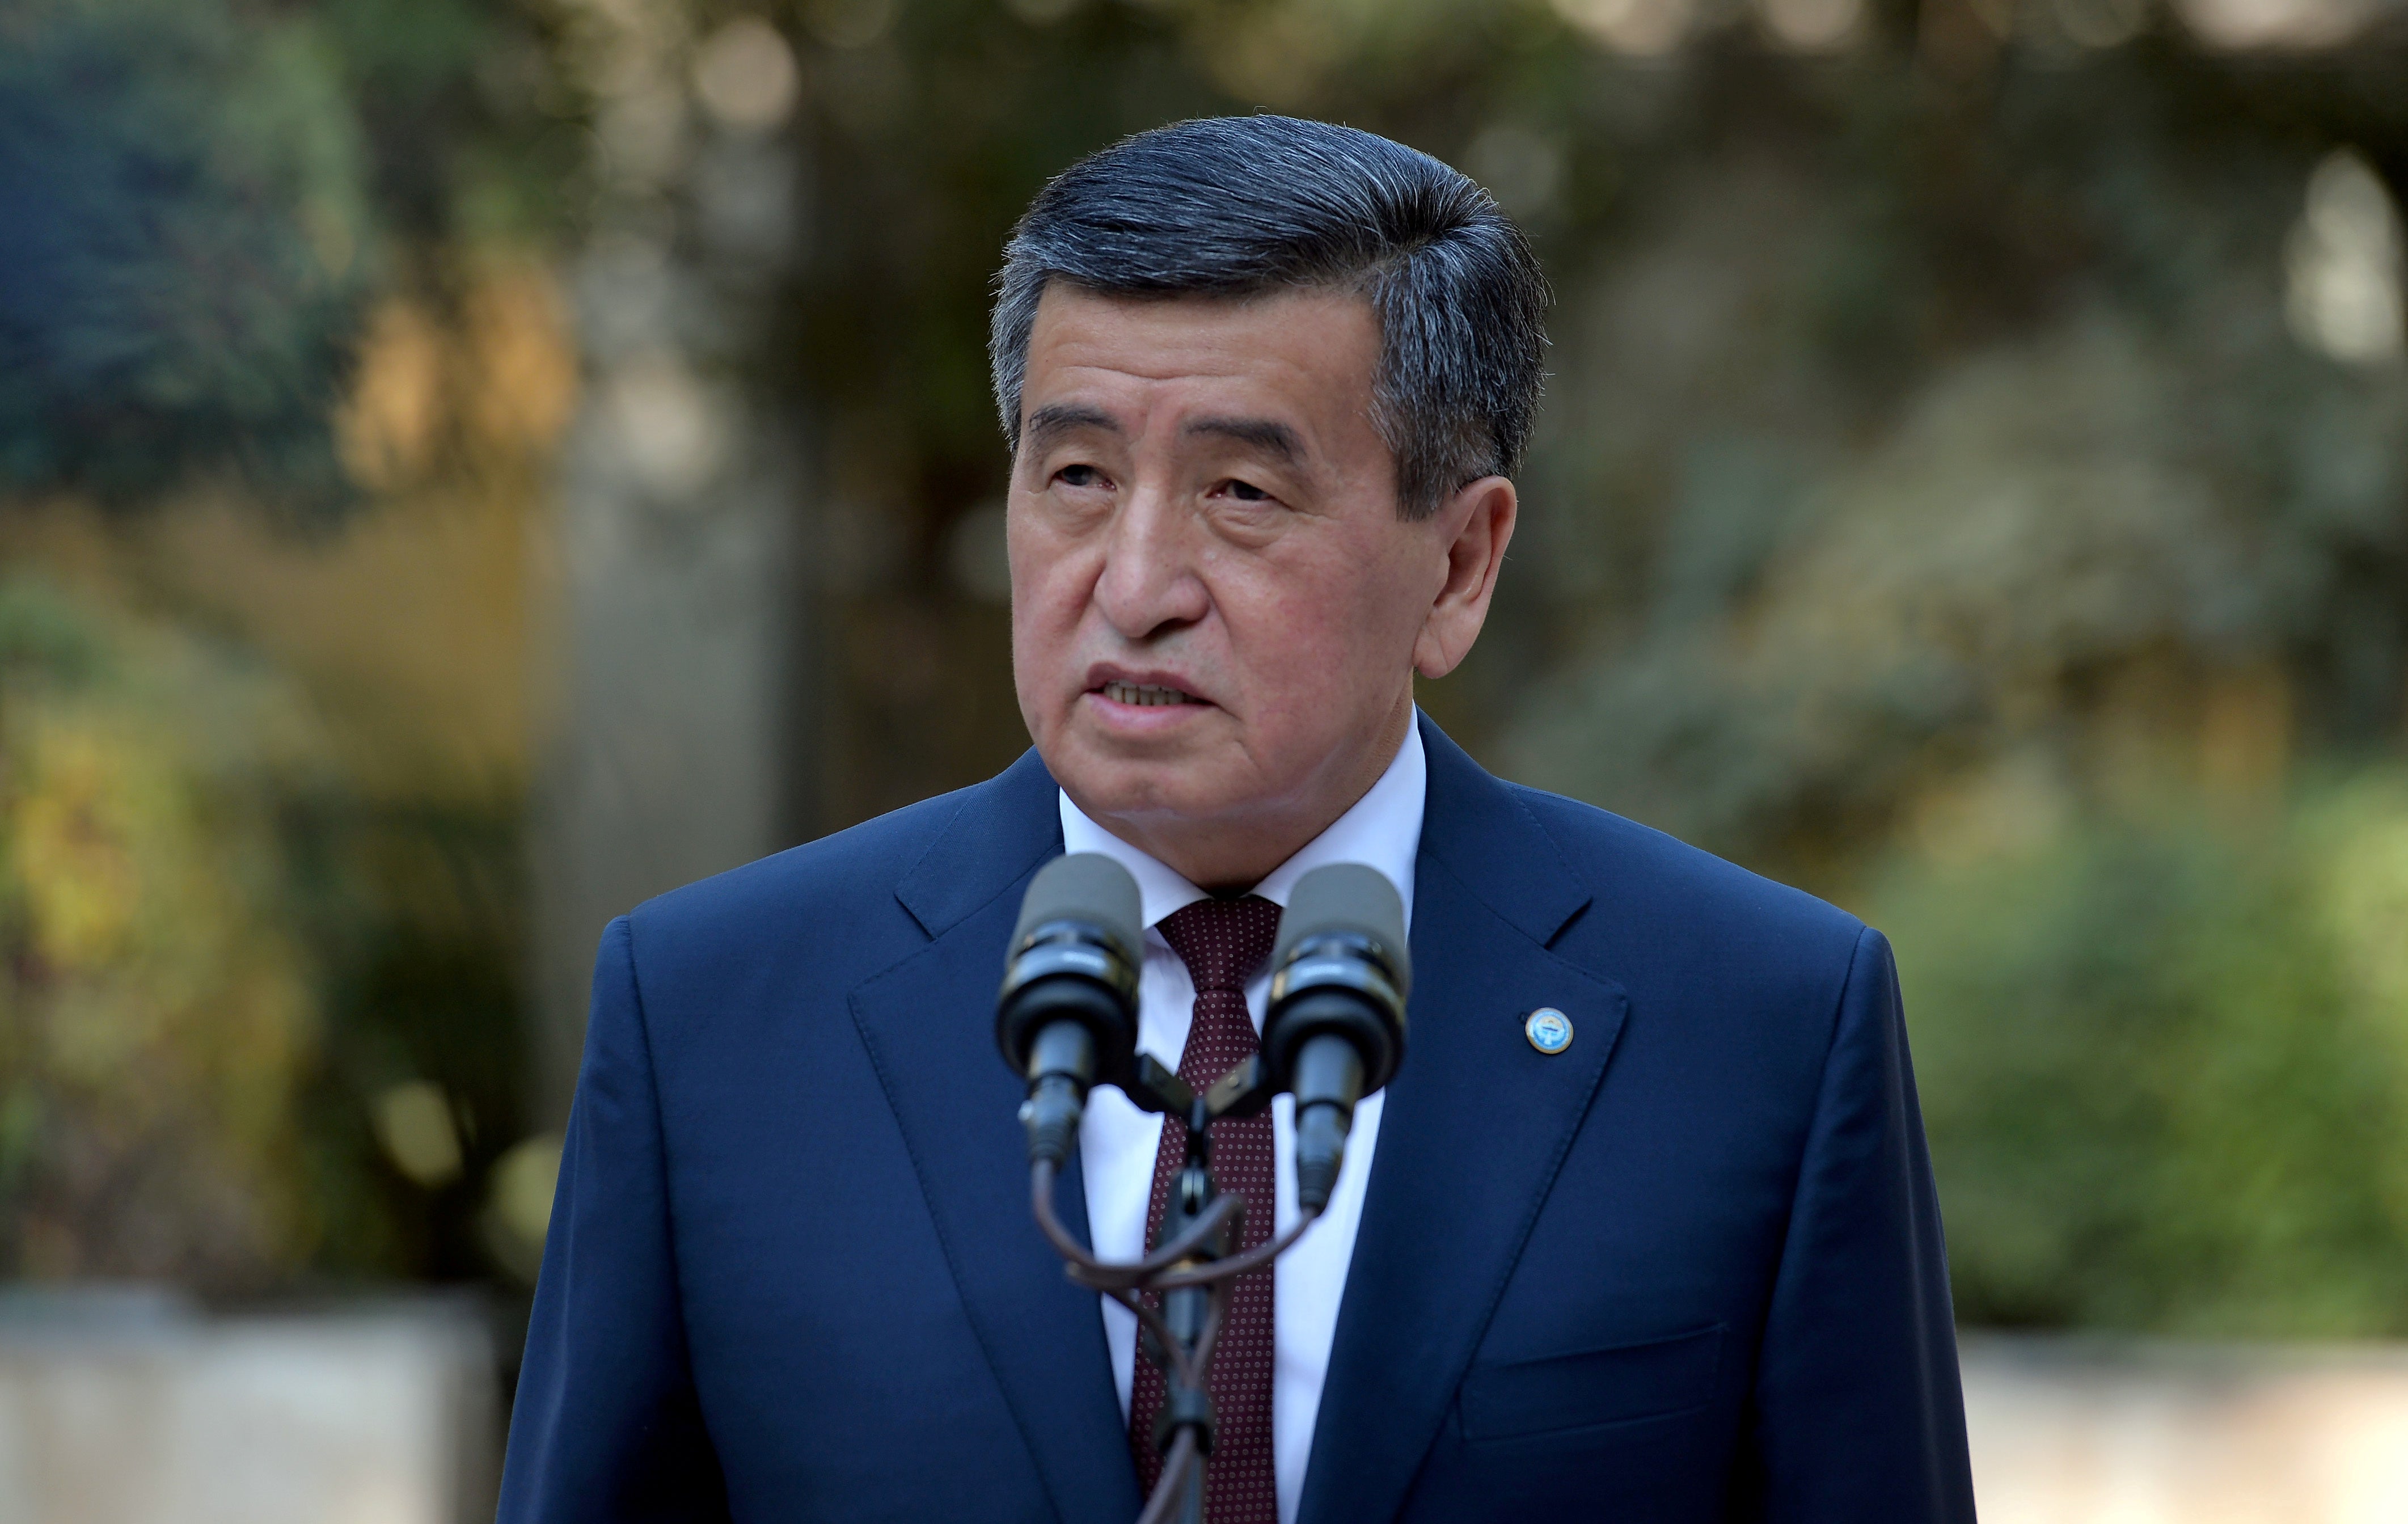 Sooronbai Jeenbekov said he will step down once a new cabinet is in place